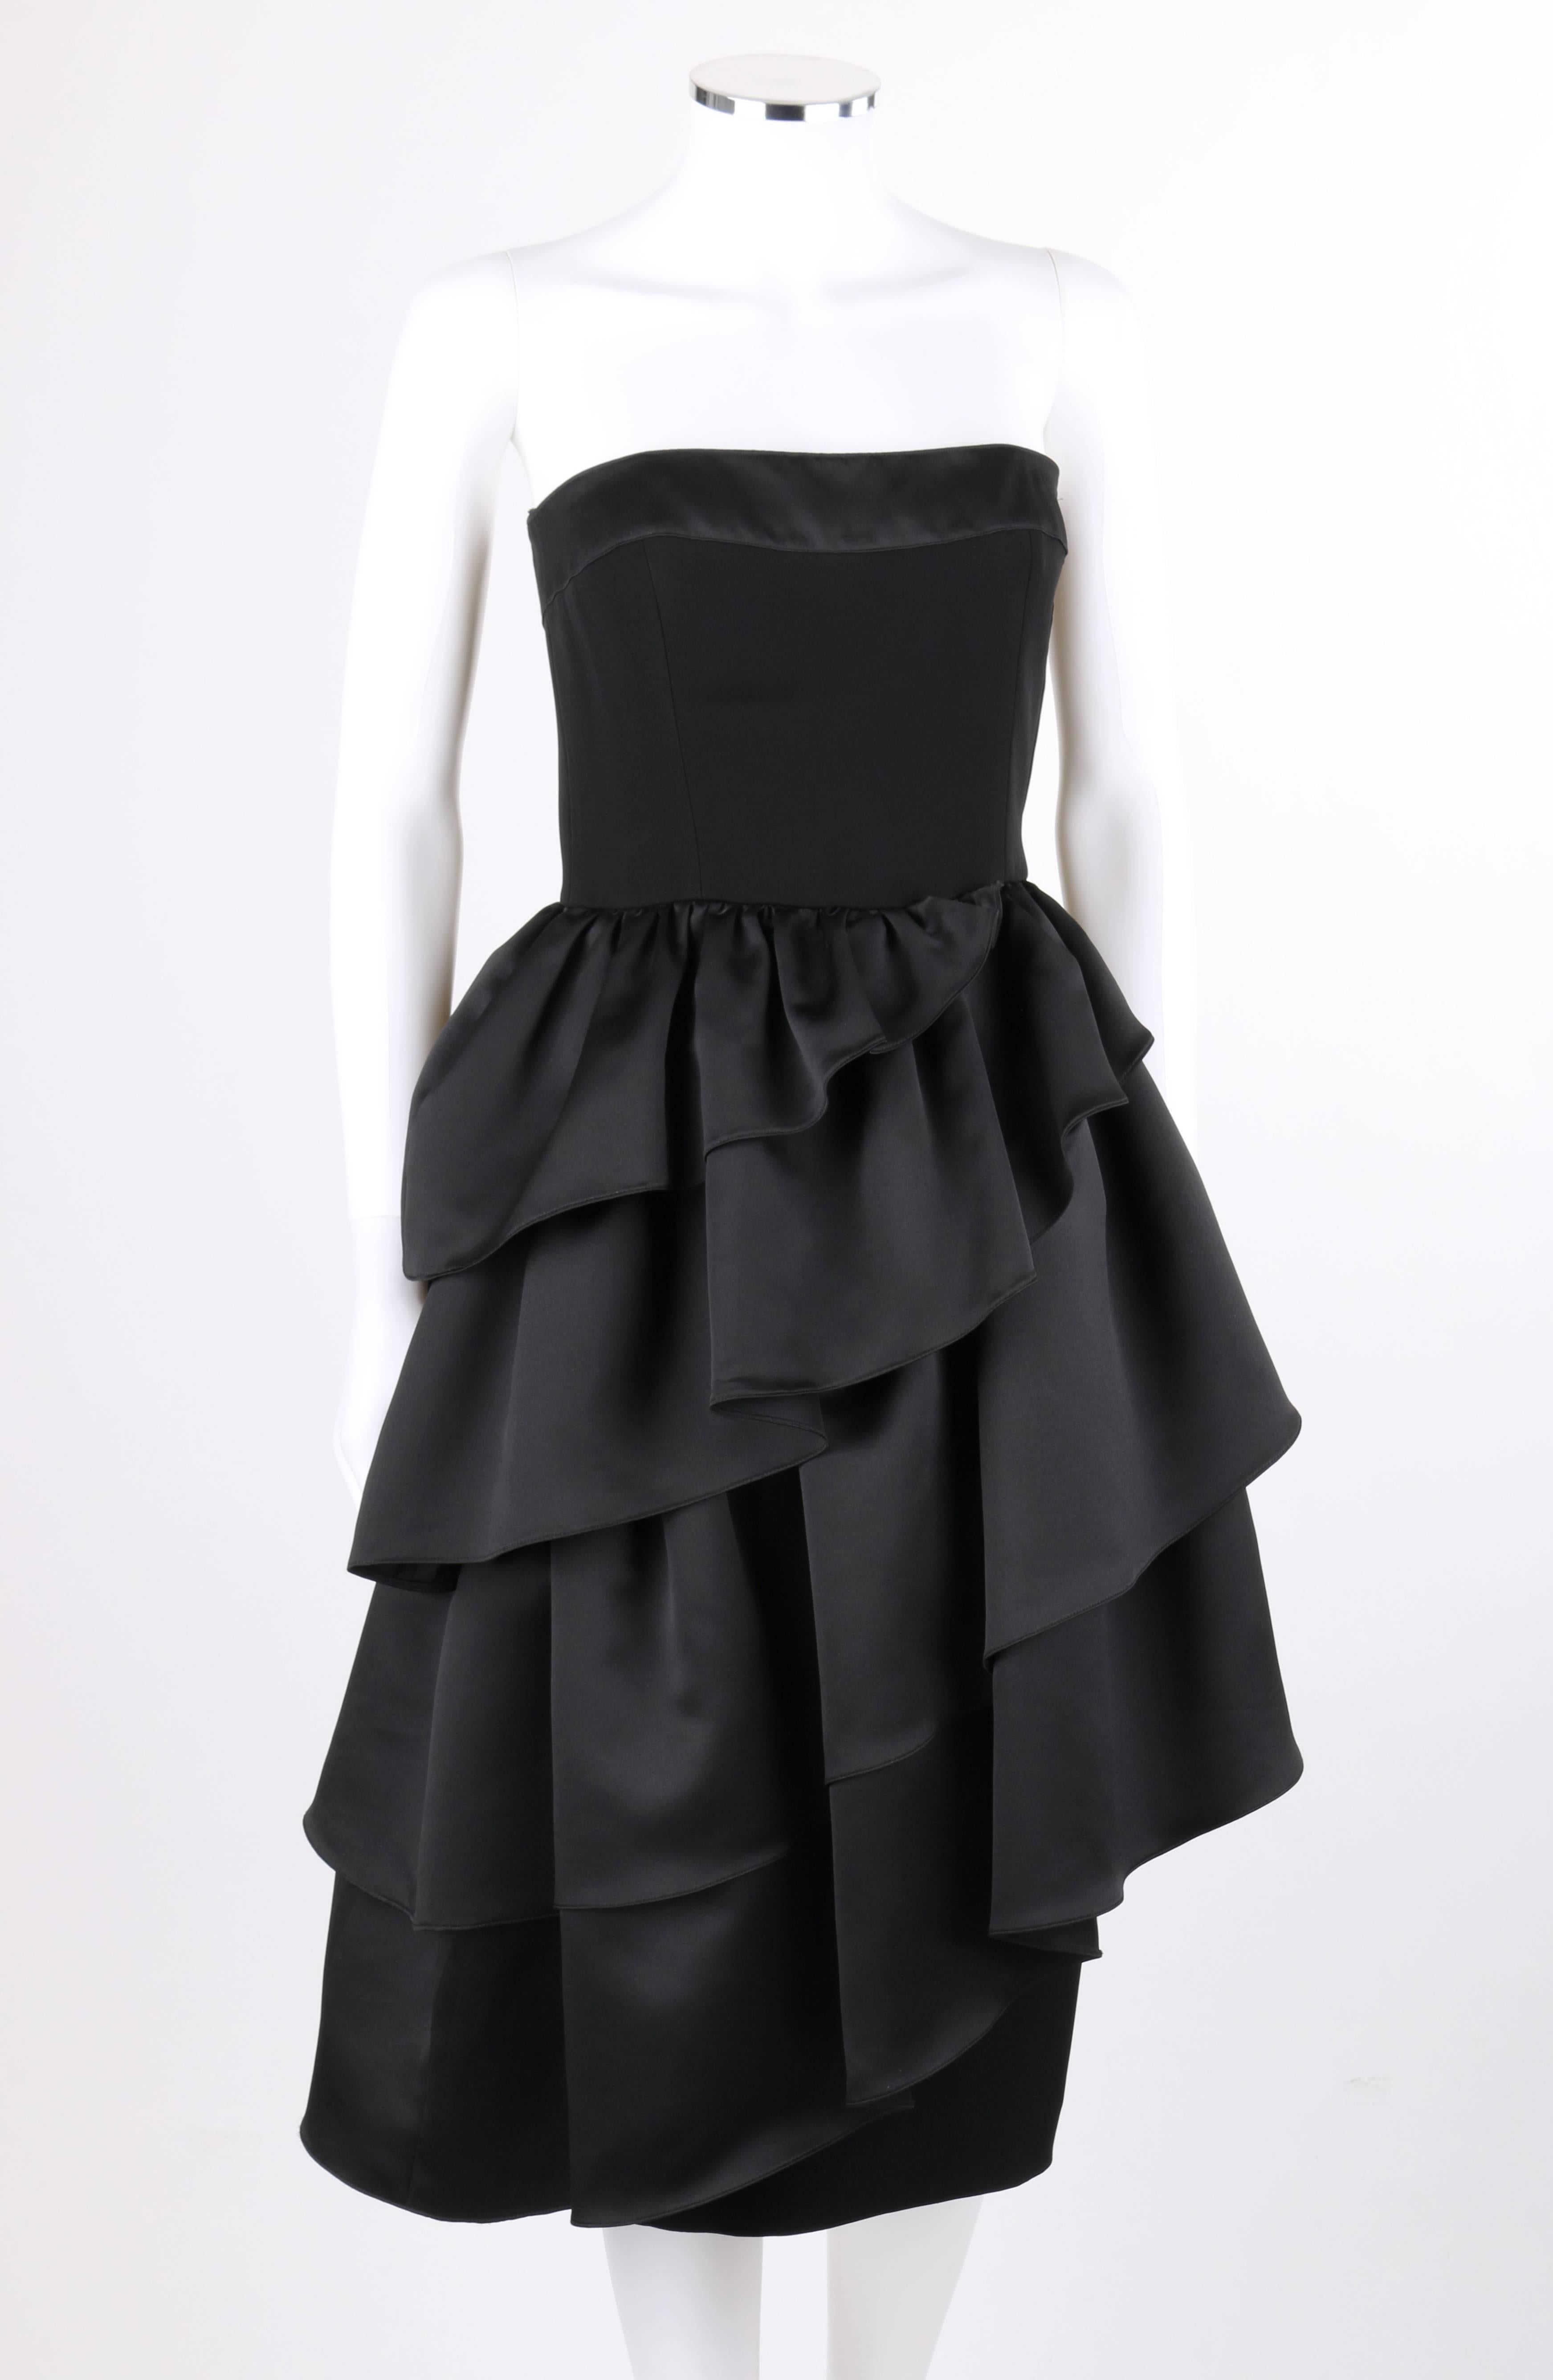 Vintage Louis Feraud c.1980's black asymmetrical tiered ruffle cocktail dress. Black satin asymmetrical ruffle four tier over skirt. Matte shift under skirt with right side seam slit. Strapless bodice with contrasting satin band along top. Left side